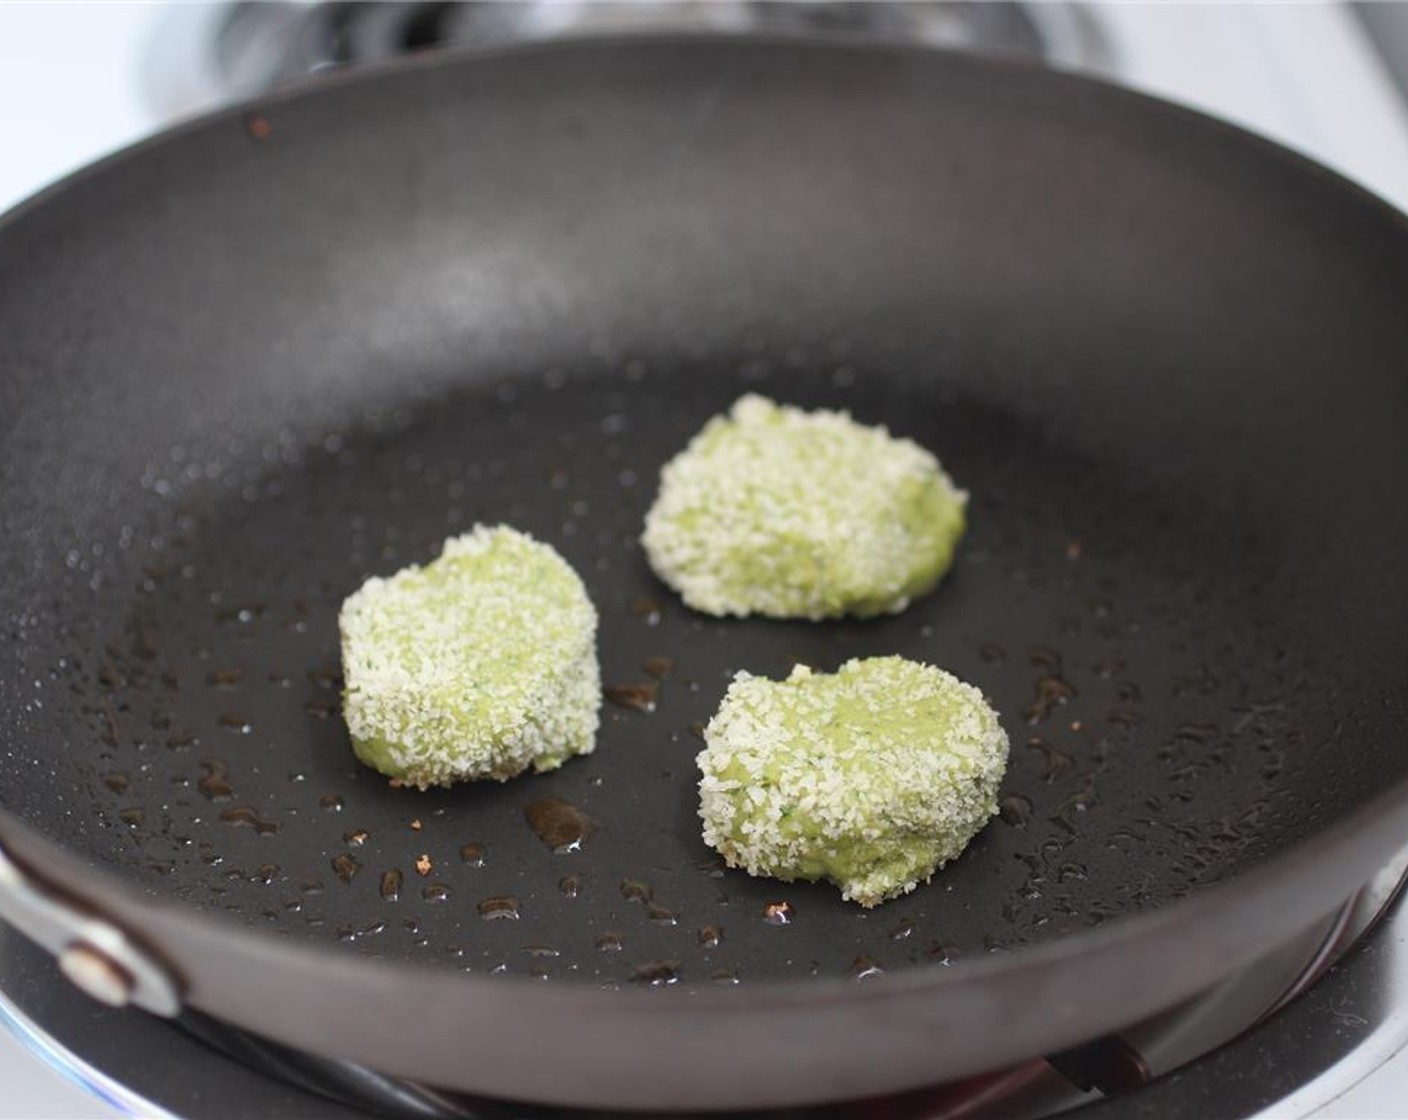 step 5 Put Canola Oil (2 Tbsp) into a skillet on medium-high heat. Allow the oil to heat until a splash of water on the pan results in the oil spitting. Then place 1-3 cheese balls in the pan and fry. Flip and brown the other side.